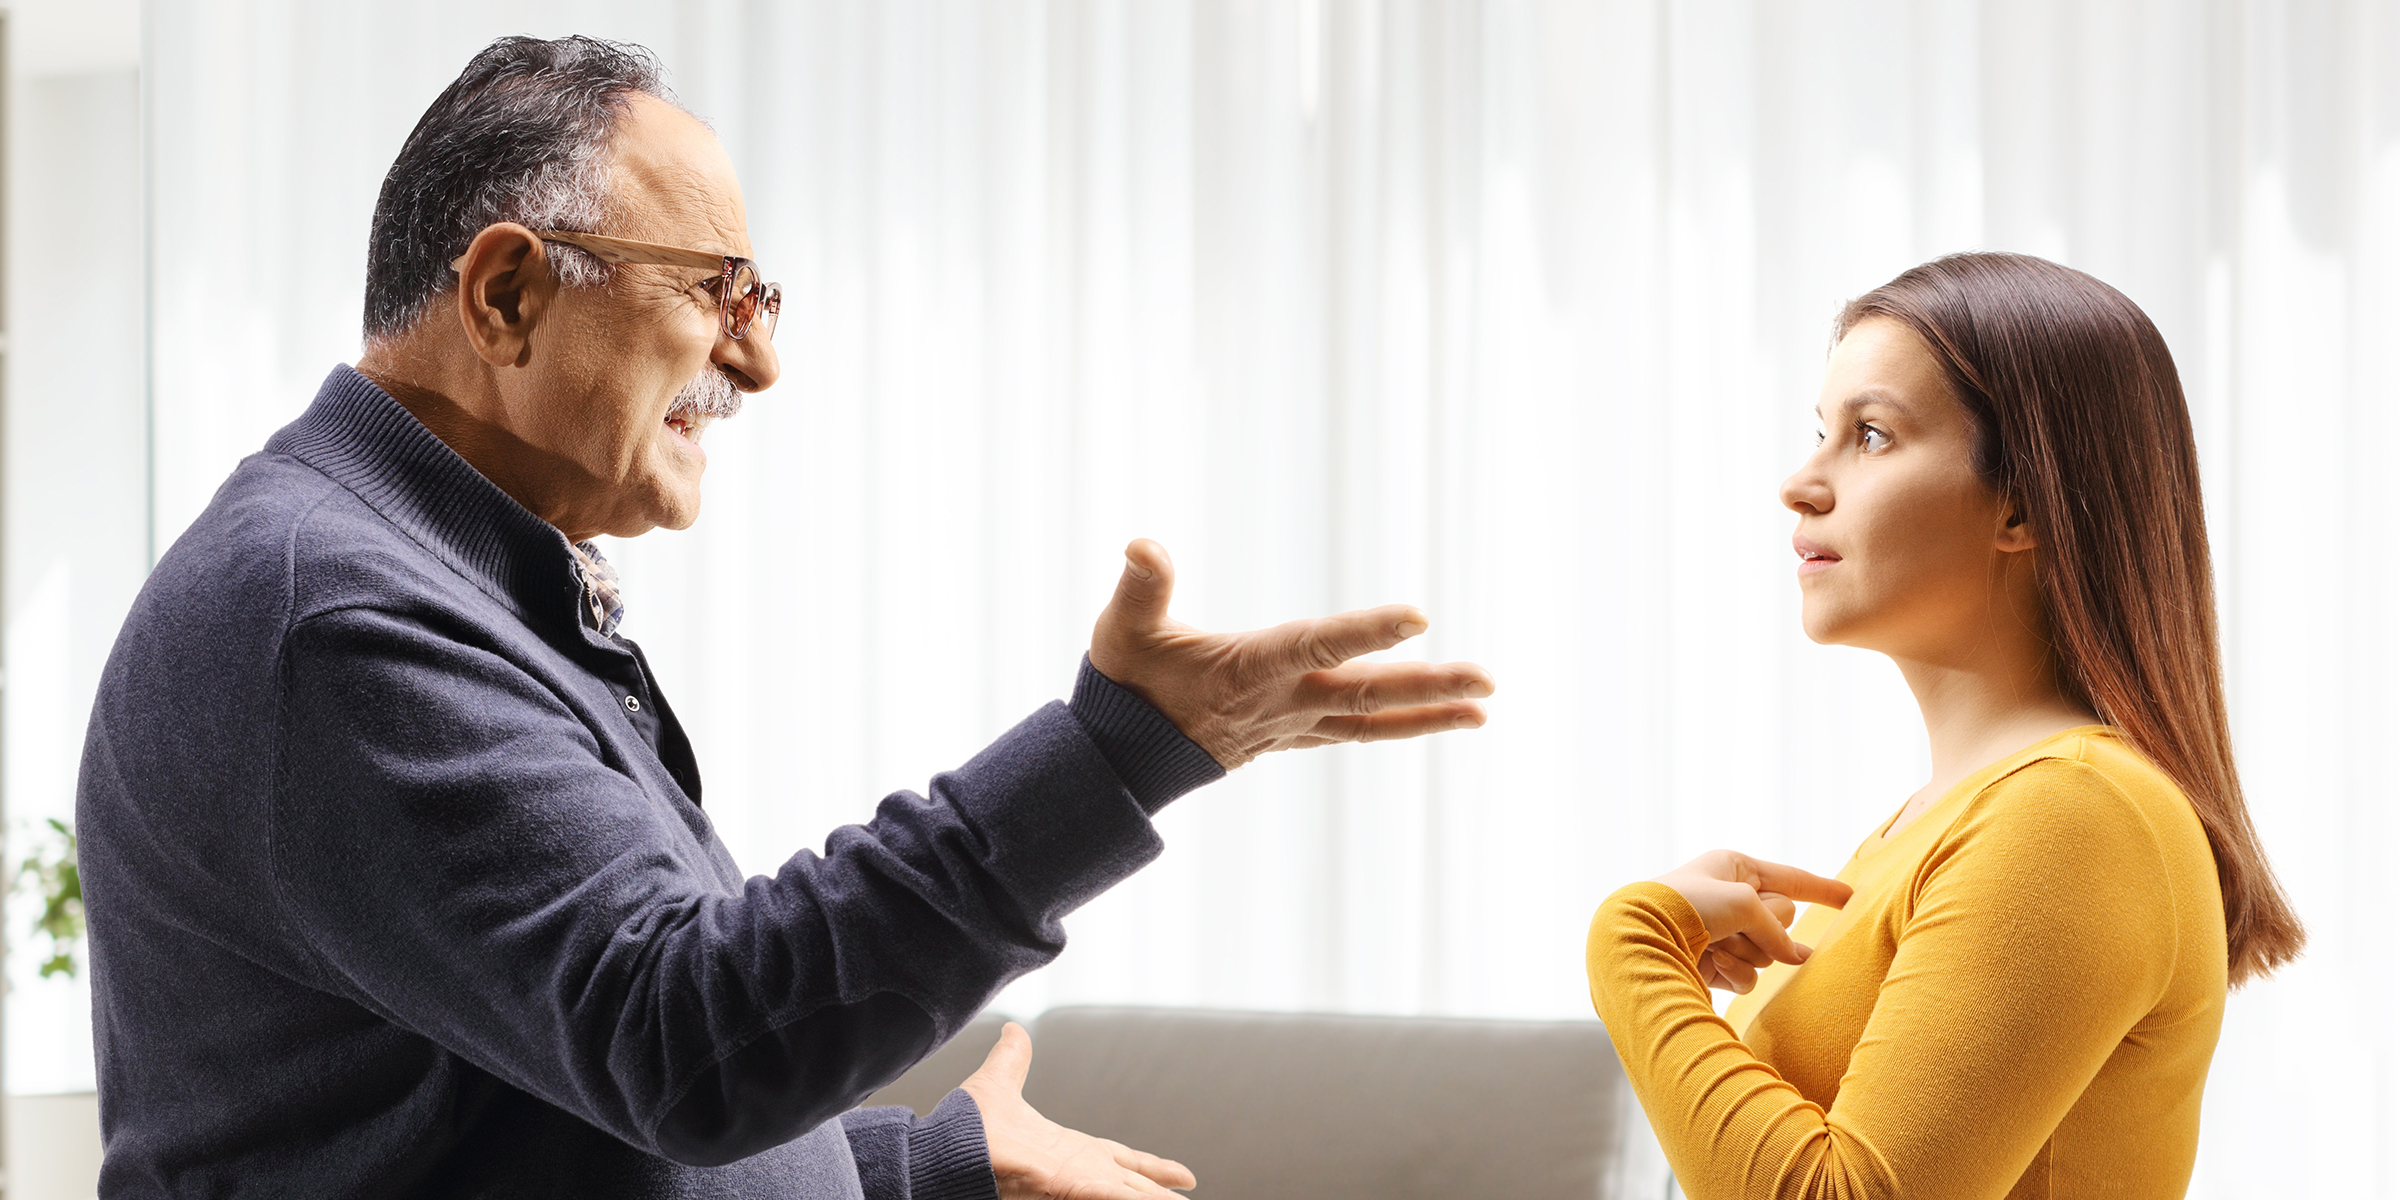 Angry man arguing with young woman | Source: Shutterstock